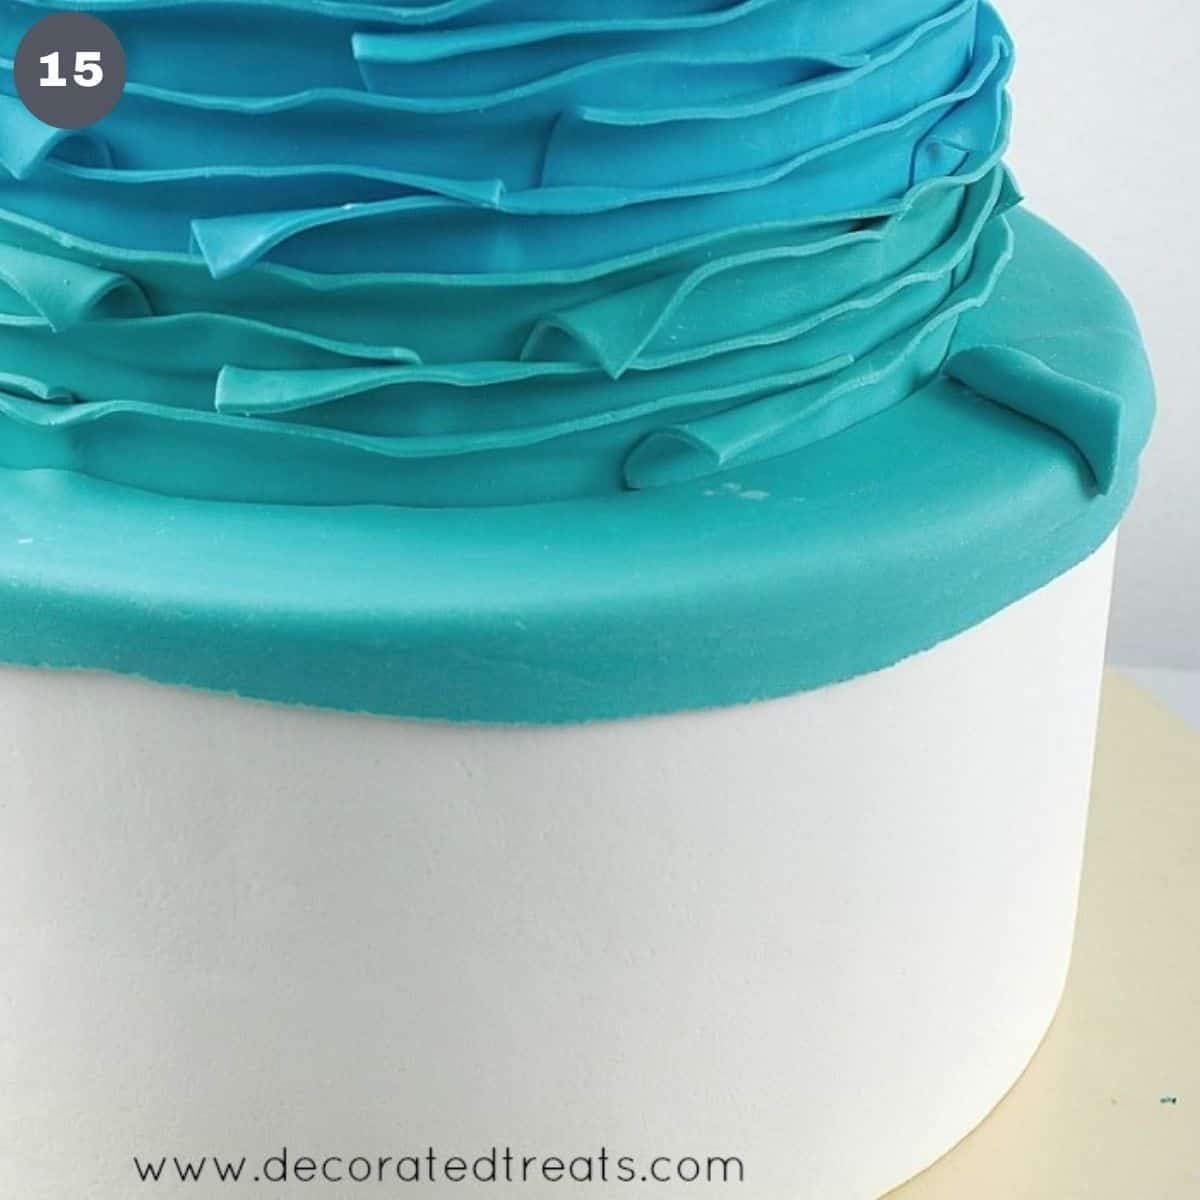 A cake covered in stripes of fondant in blue, turquoise and green.